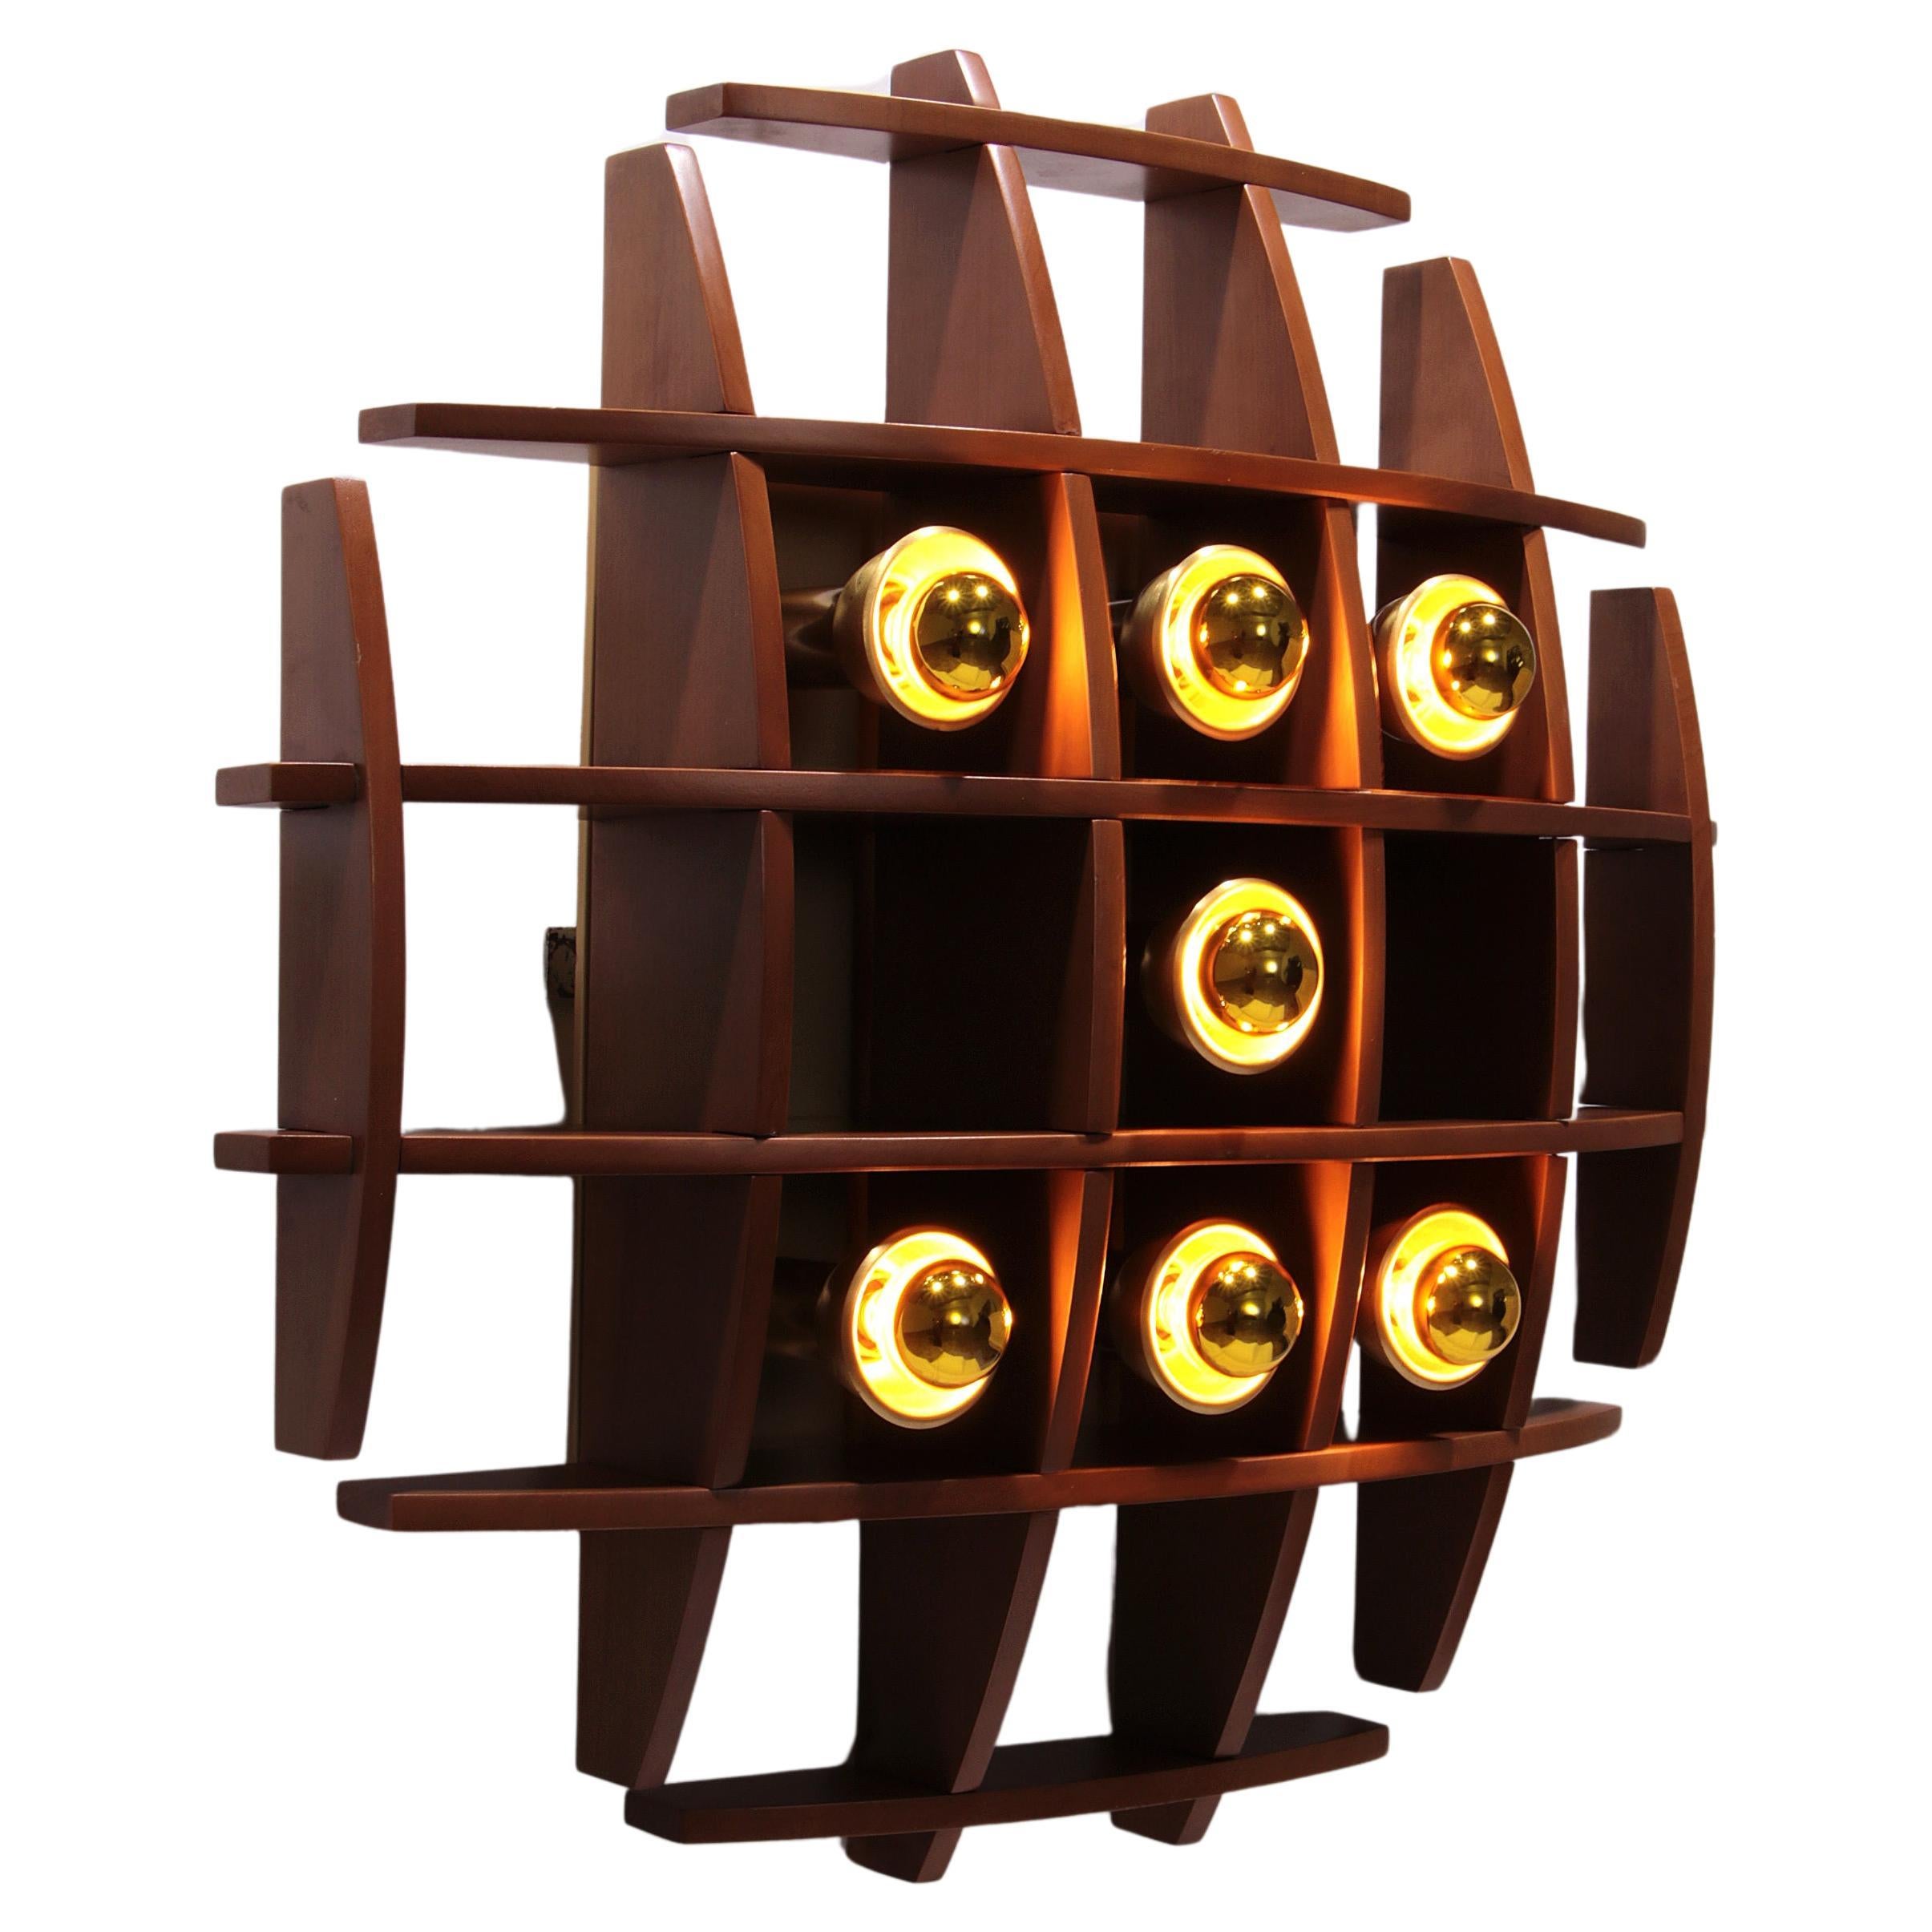 Iconic Wooden wall lamp by Angelo Brotto, 1960s design For Sale